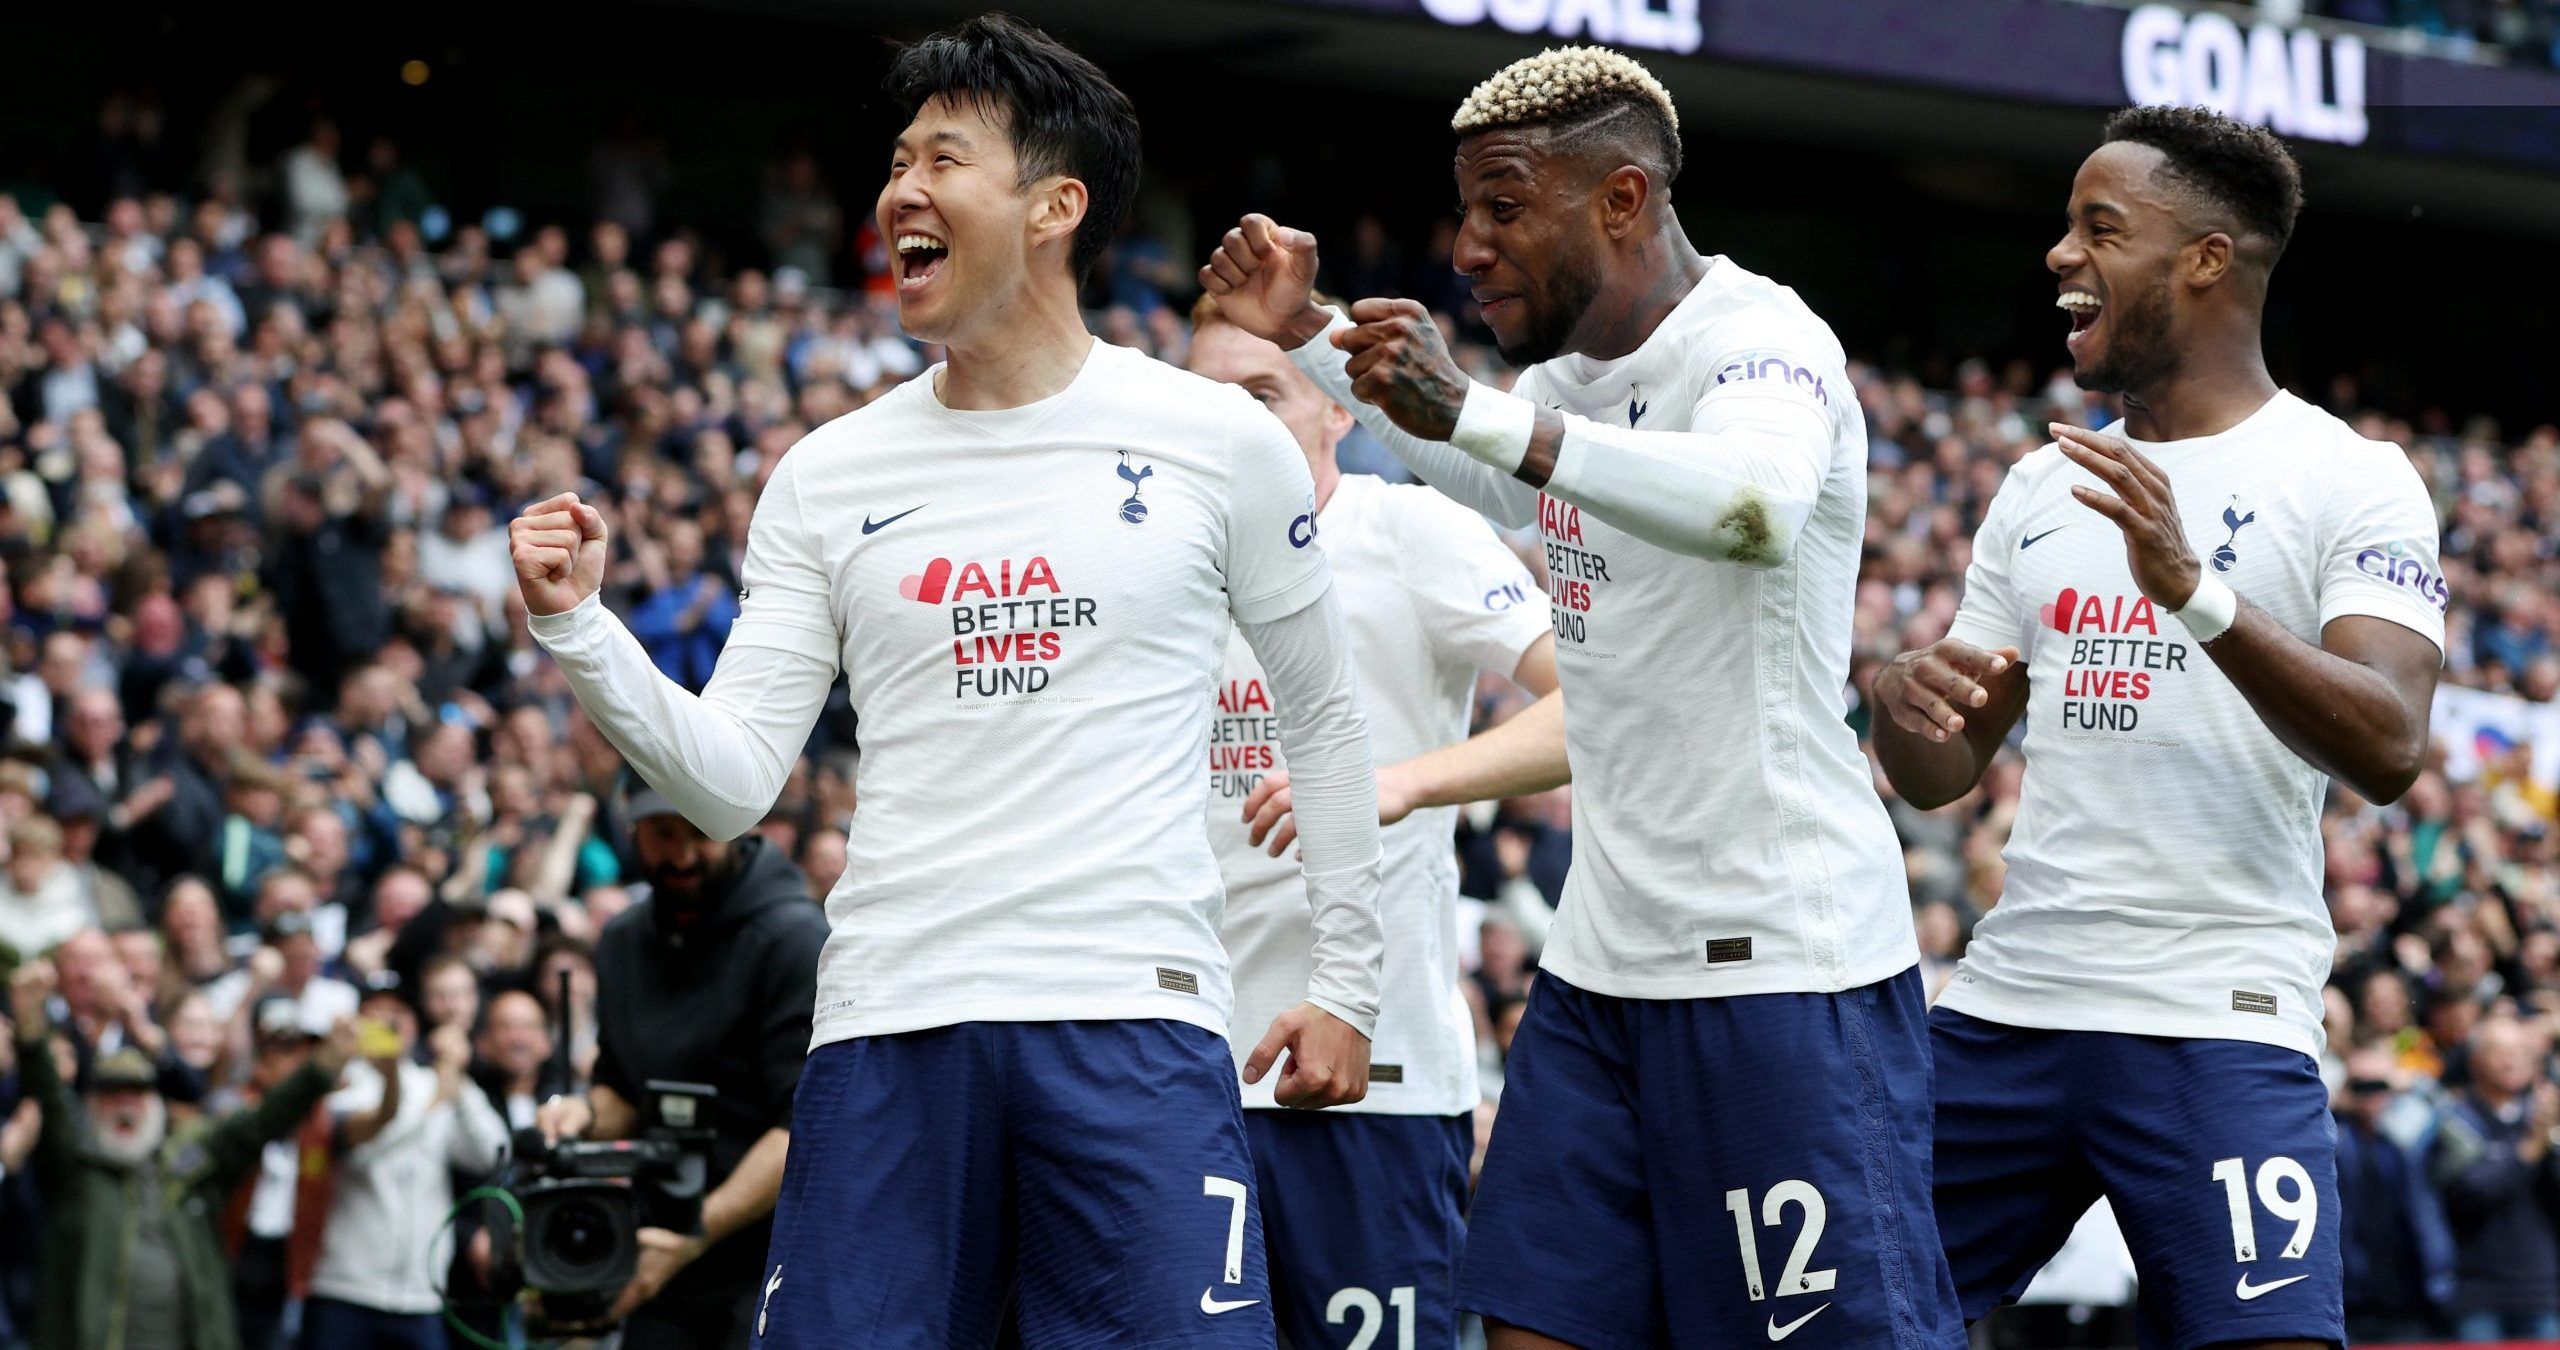 Soccer Football - Premier League - Tottenham Hotspur v Leicester City - Tottenham Hotspur Stadium, London, Britain - May 1, 2022 Tottenham Hotspur's Son Heung-min celebrates scoring their third goal with Emerson Royal and Ryan Sessegnon Action Images via Reuters/Paul Childs EDITORIAL USE ONLY. No use with unauthorized audio, video, data, fixture lists, club/league logos or 'live' services. Online in-match use limited to 75 images, no video emulation. No use in betting, games or single club /leag